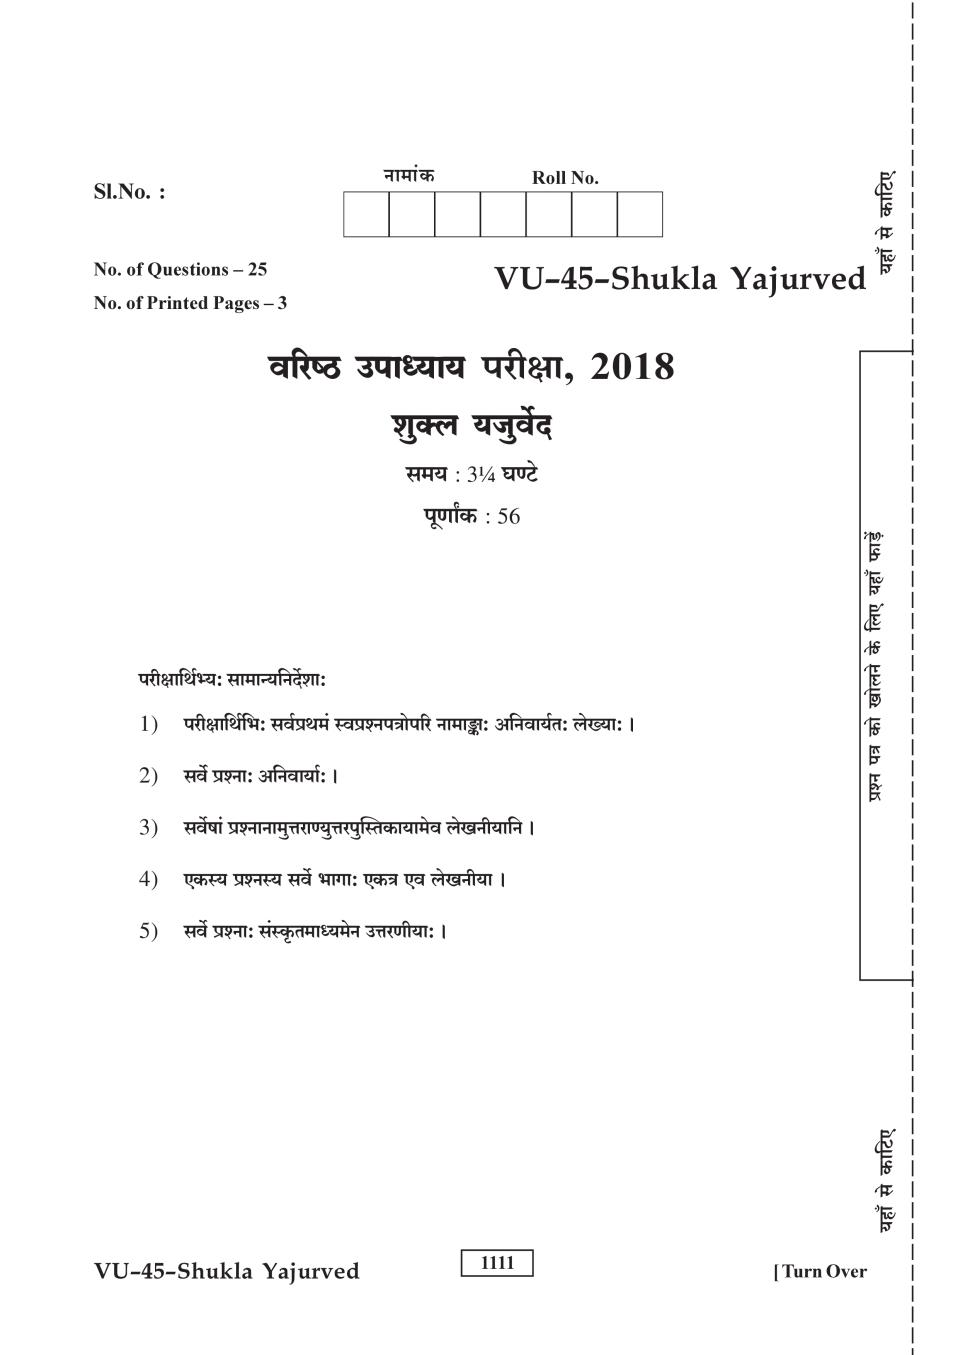 Rajasthan Board V Upadhyay Shukla Yajurved Question Paper 2018 - Page 1